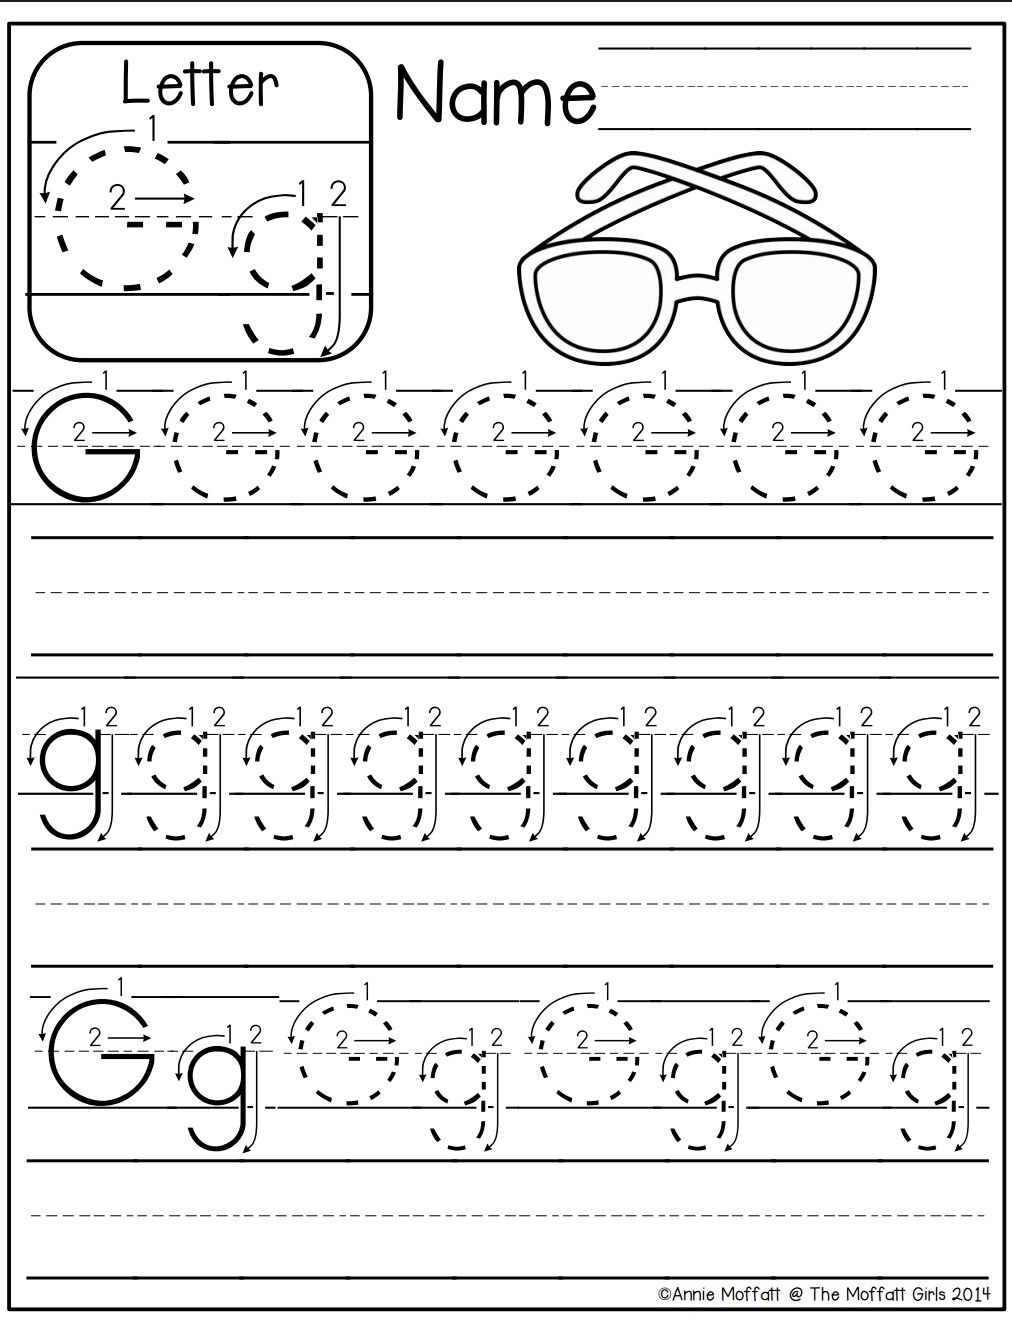 Letter G Tracing Sheet AlphabetWorksheetsFree